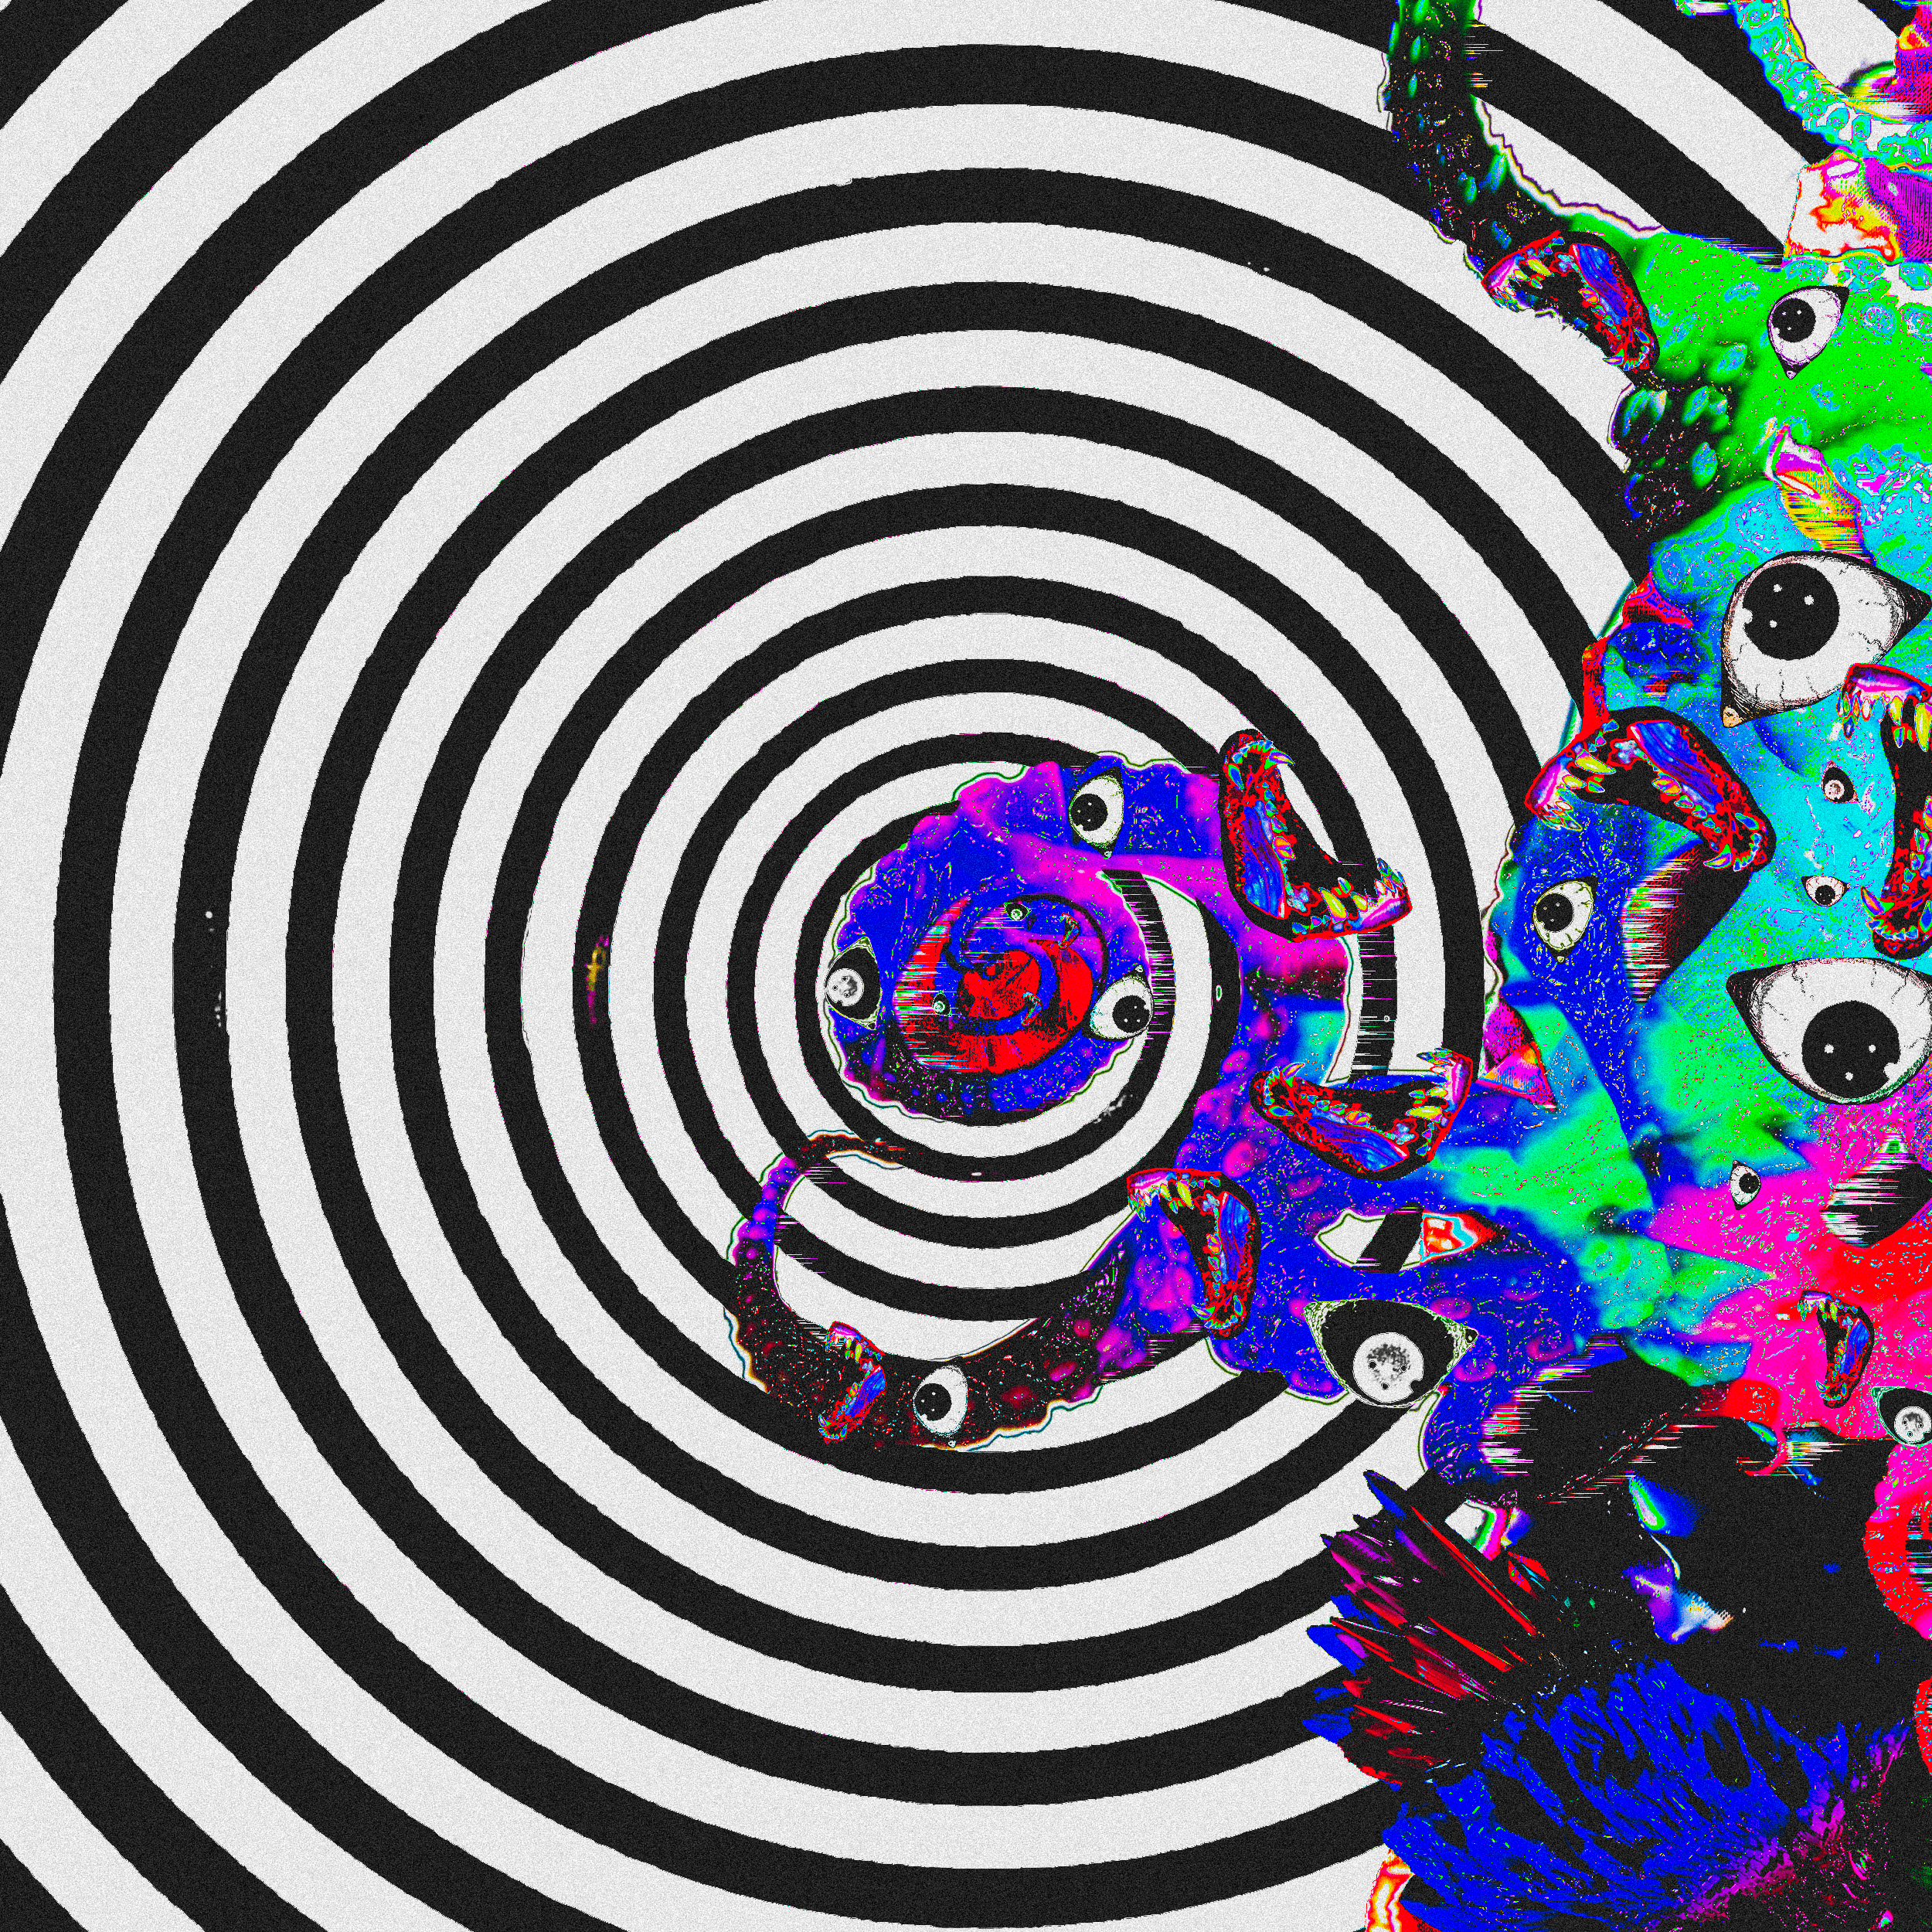 It came from The Spiral